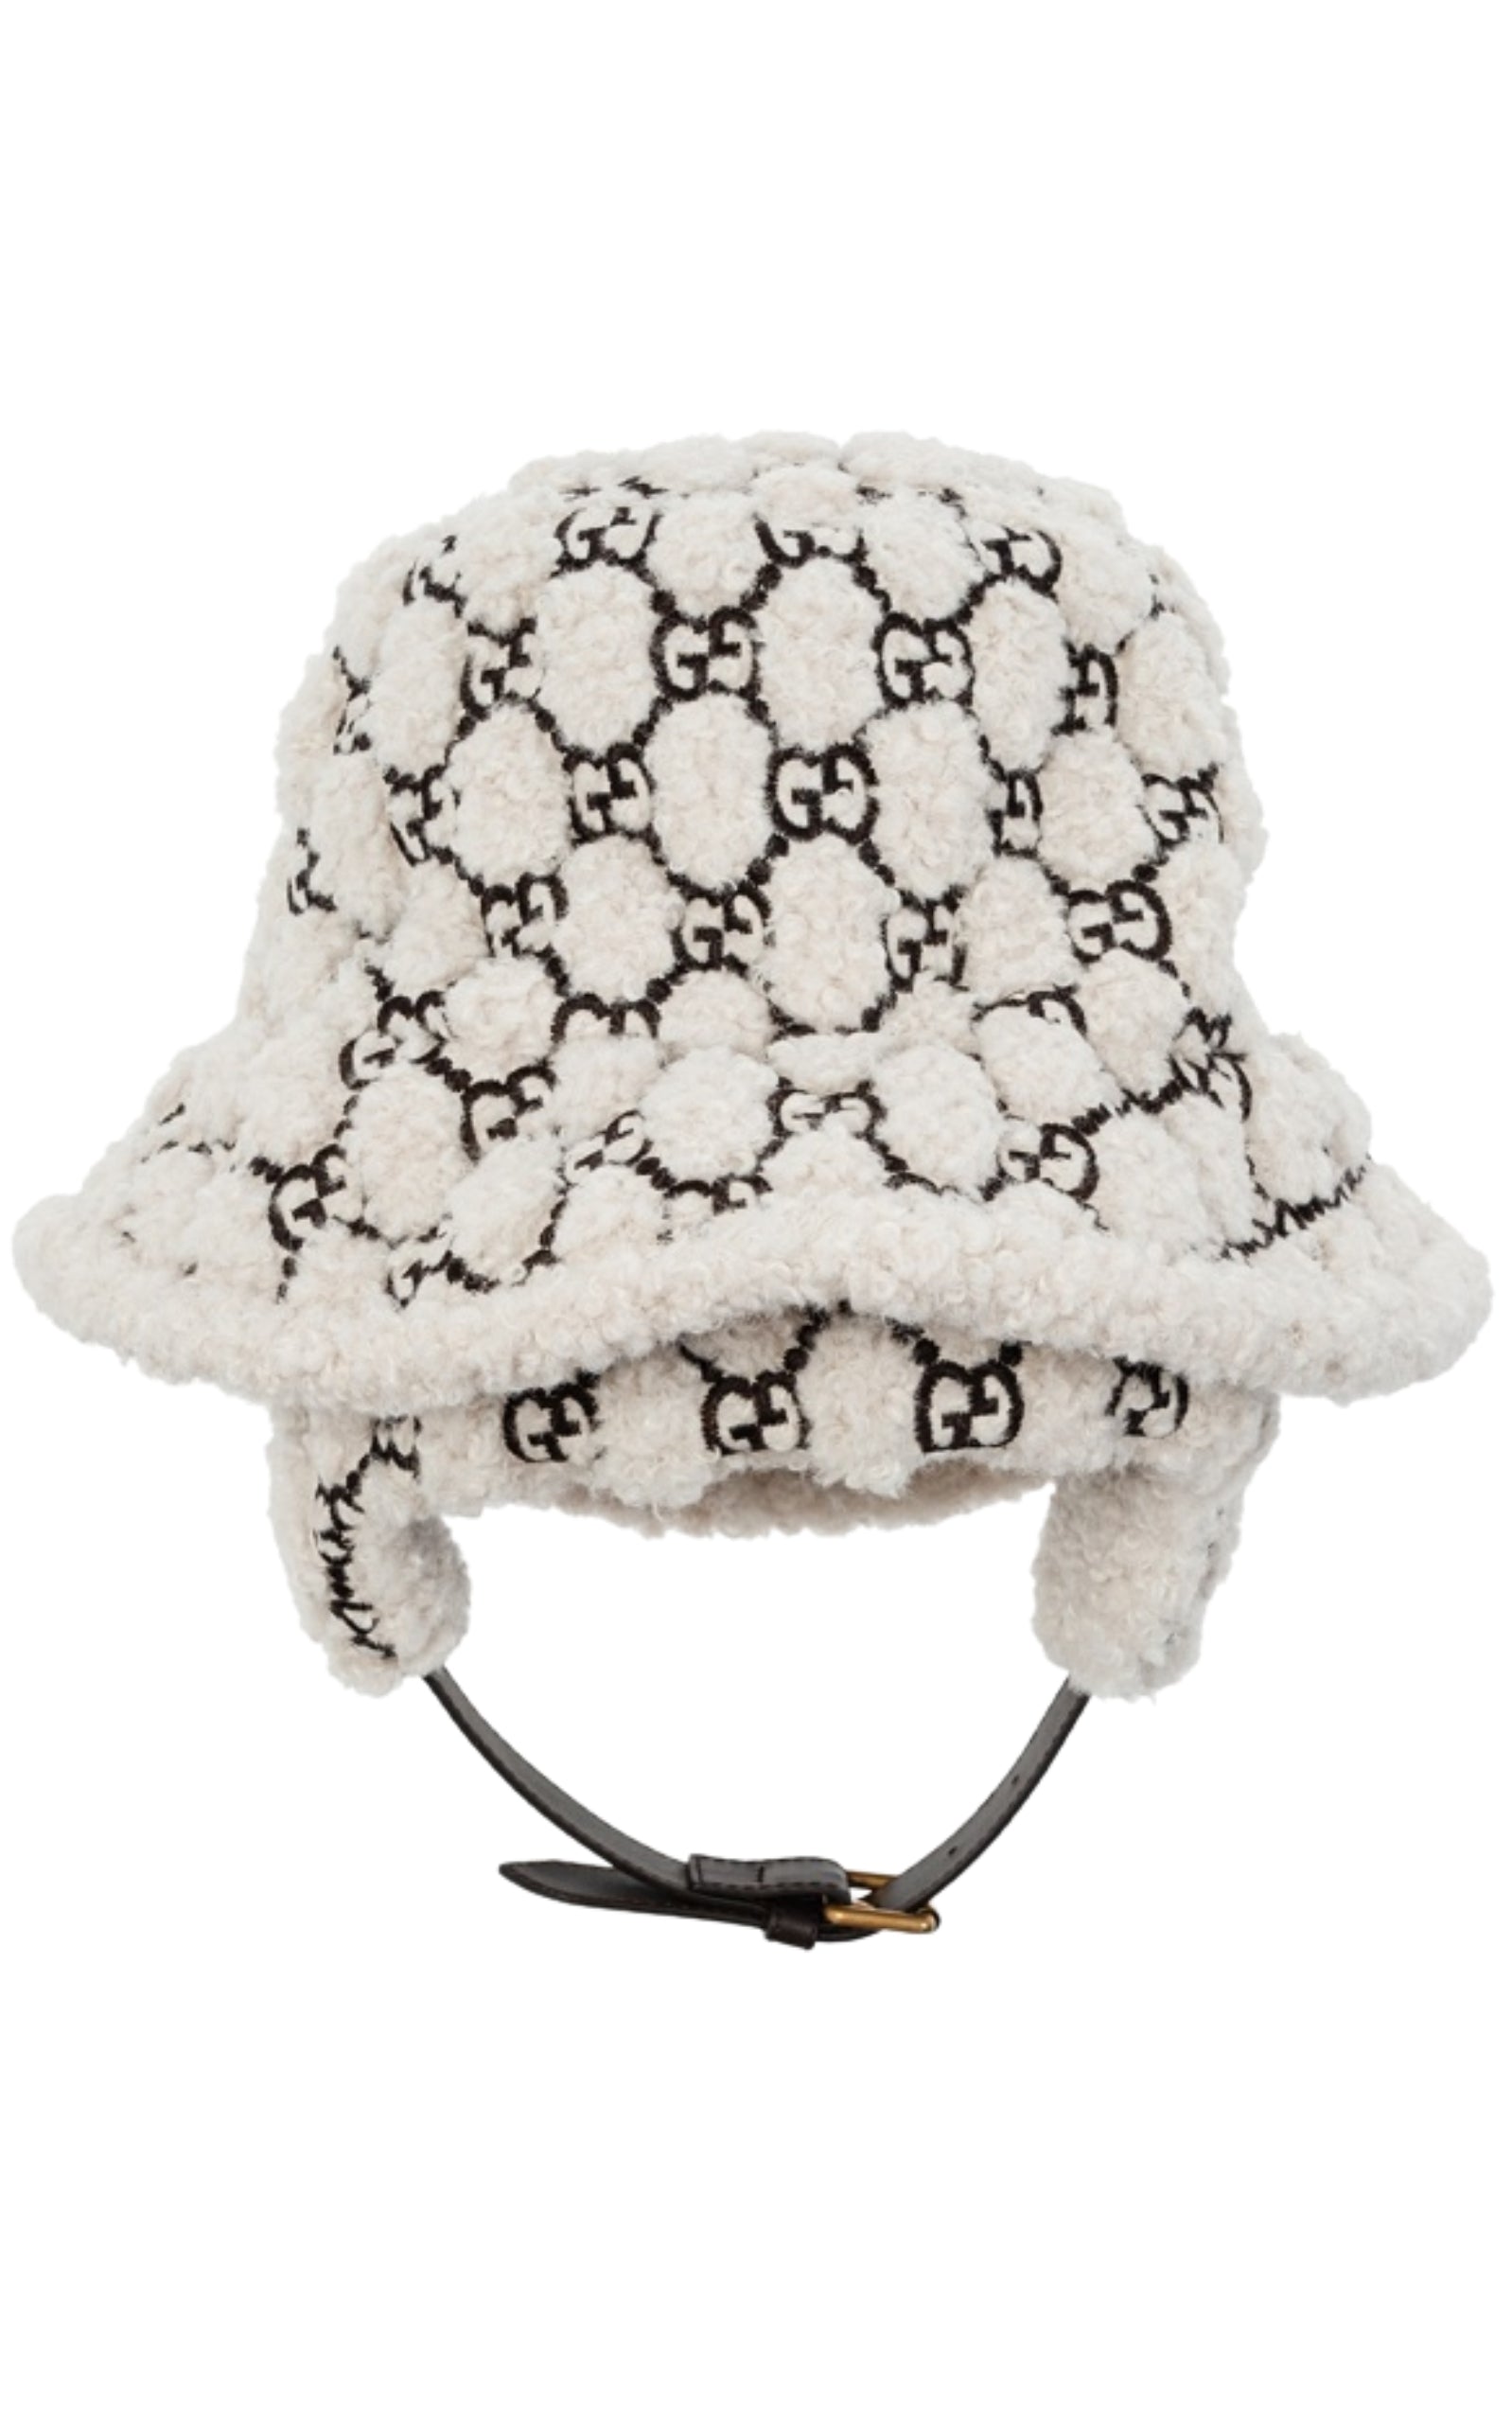  GucciCurly Gg Eco Fur Hat With Ear Flaps - Runway Catalog